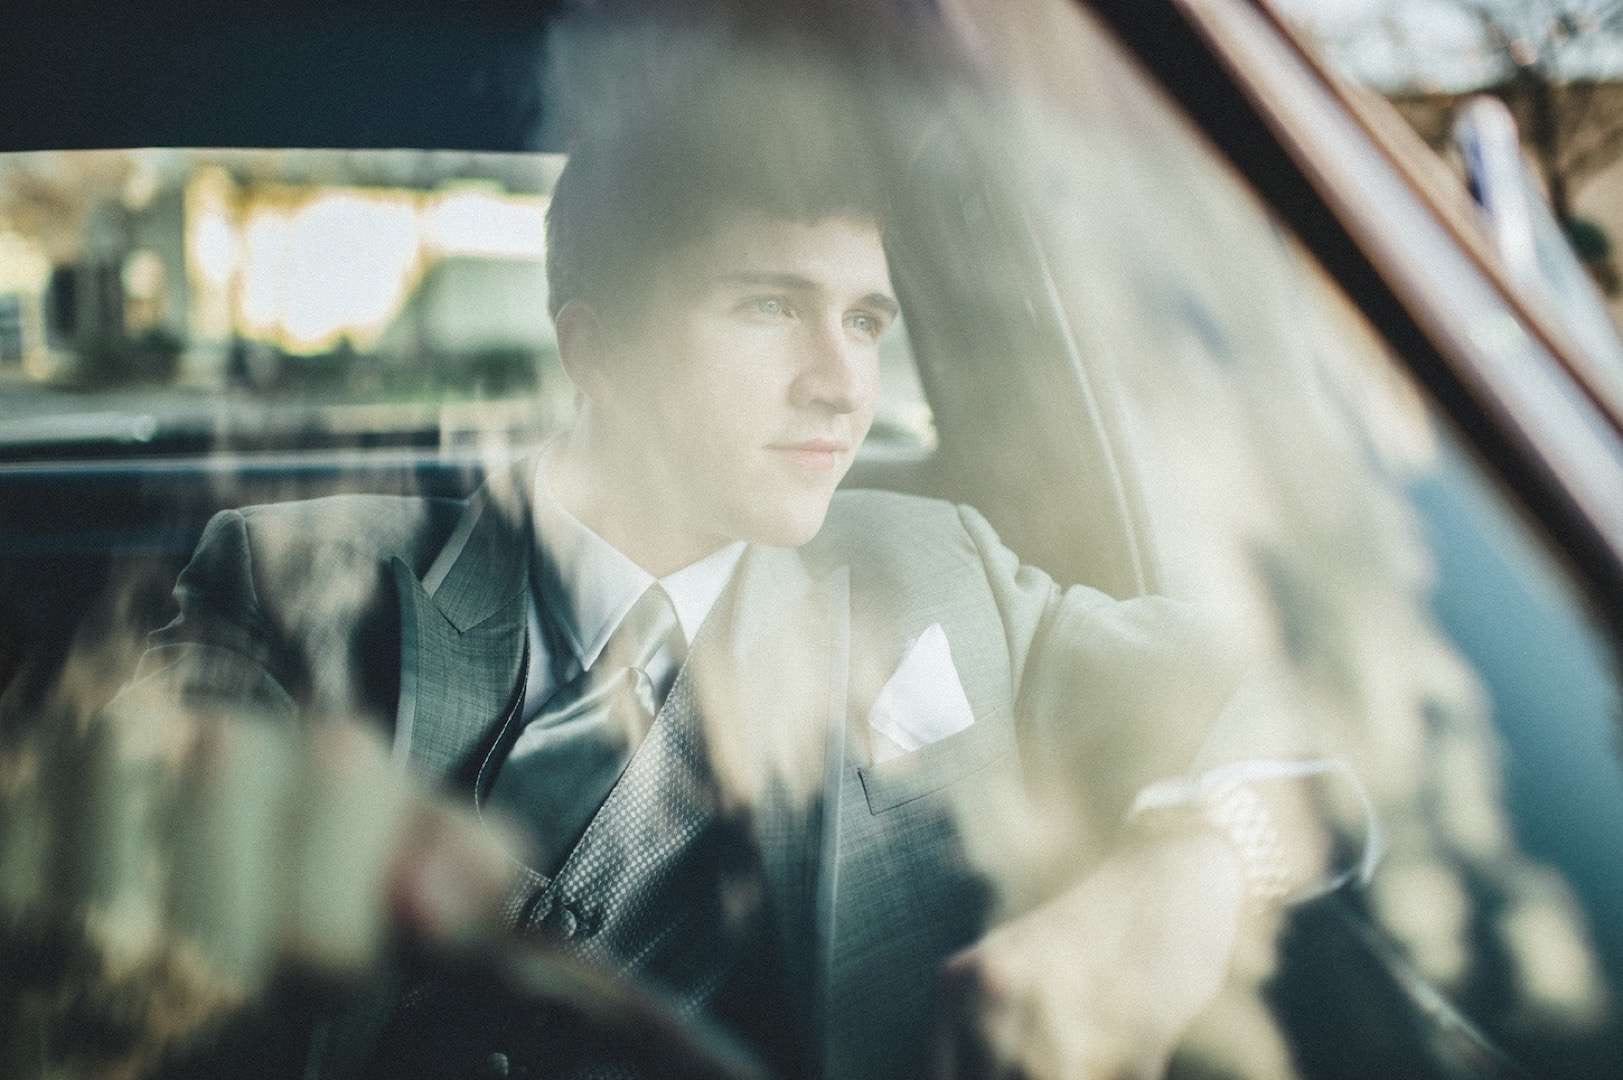 IU C&I Studio Portfolio and Page Mens Wearhouse Sprin Lookbook Male model in a gray suit posing for a camera in a car.